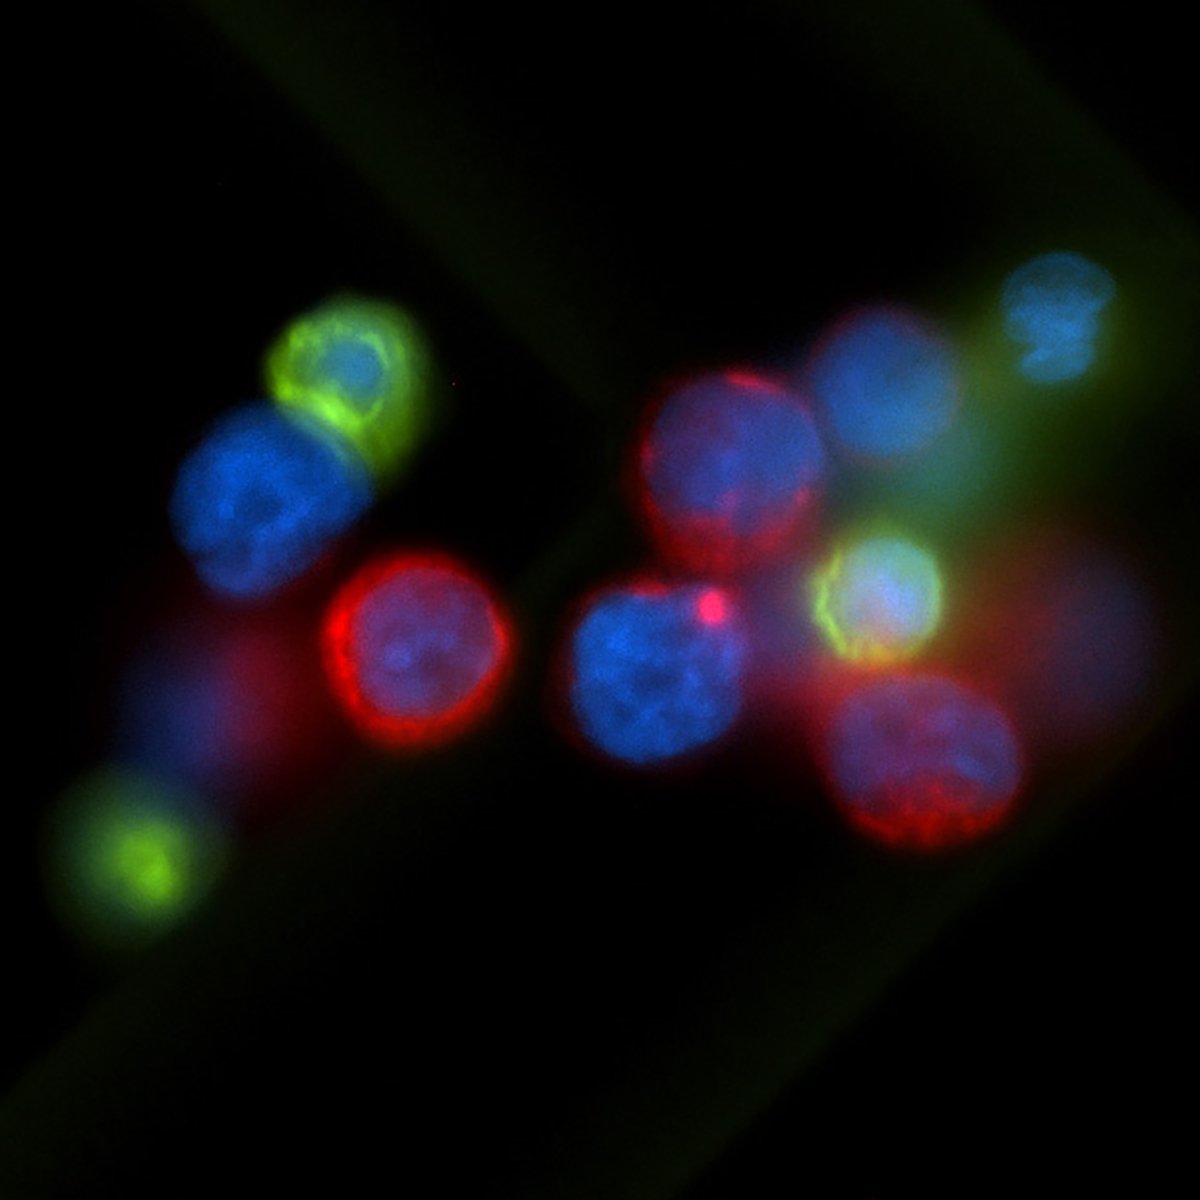 A micrograph shows several colored, orb-like cells against a black background. The center of each cell appears blue with cancer cells outlined in red and white blood cells outlined in green.